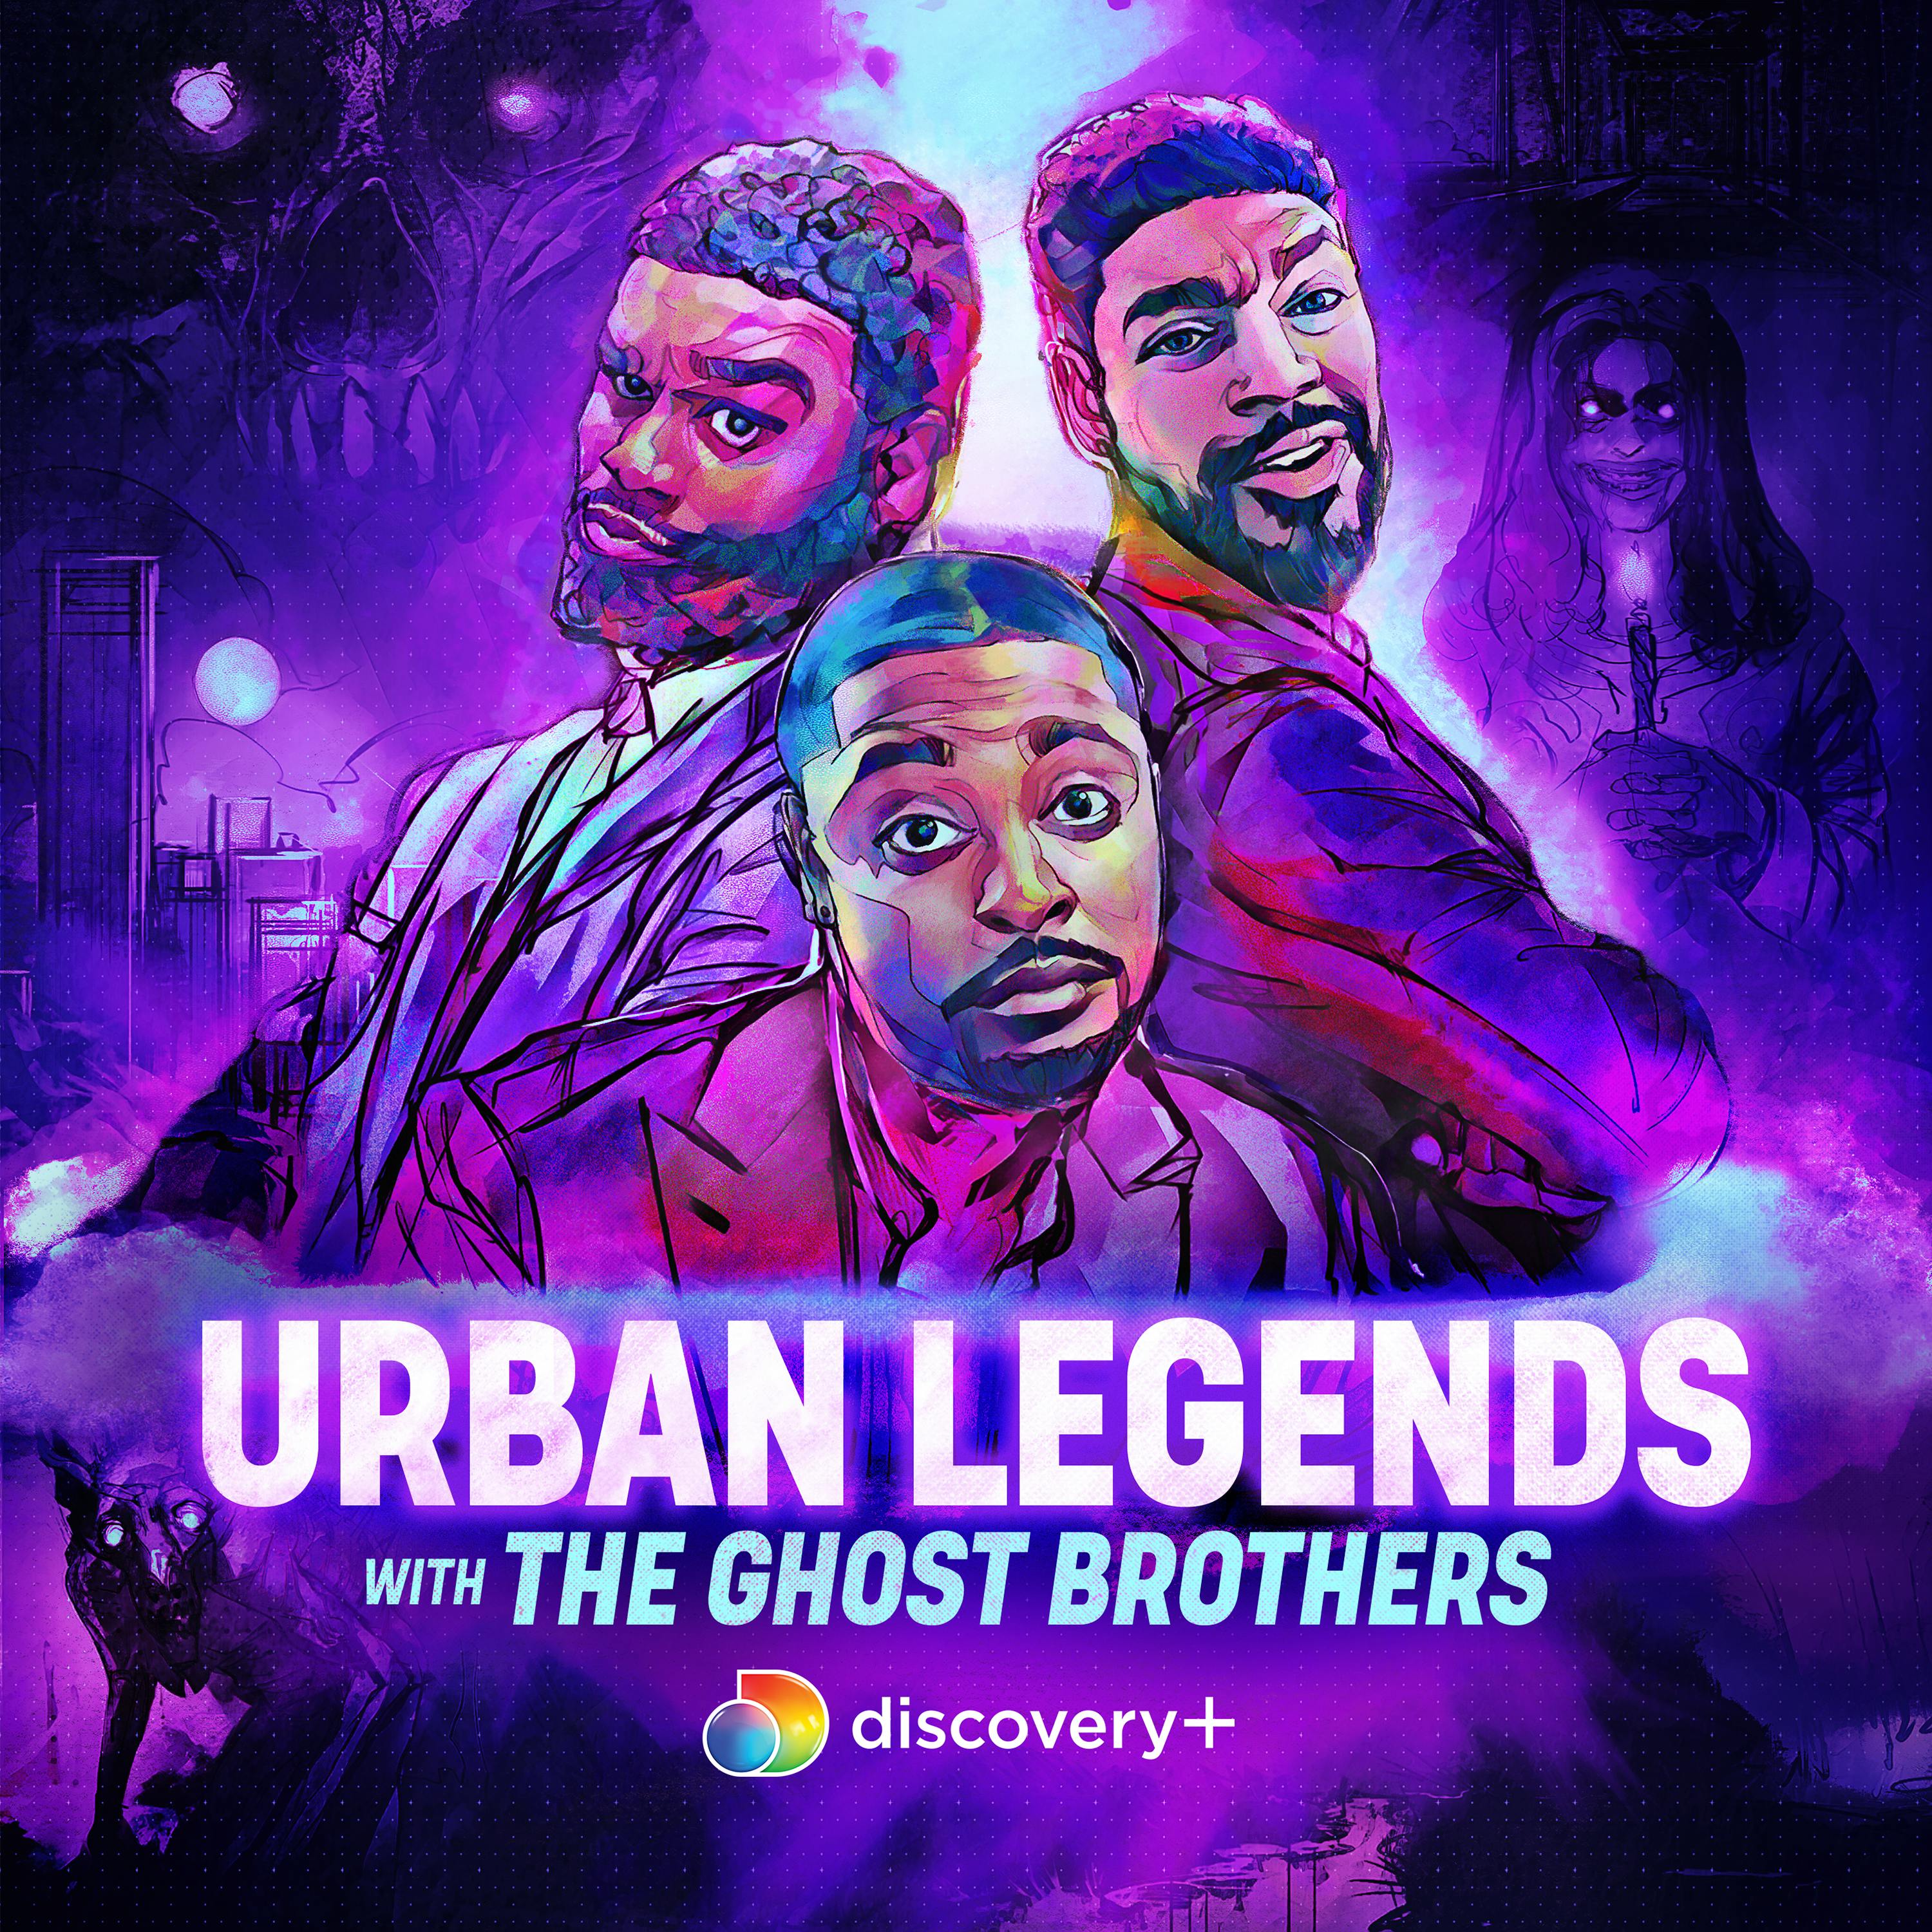 Check Out Urban Legends!